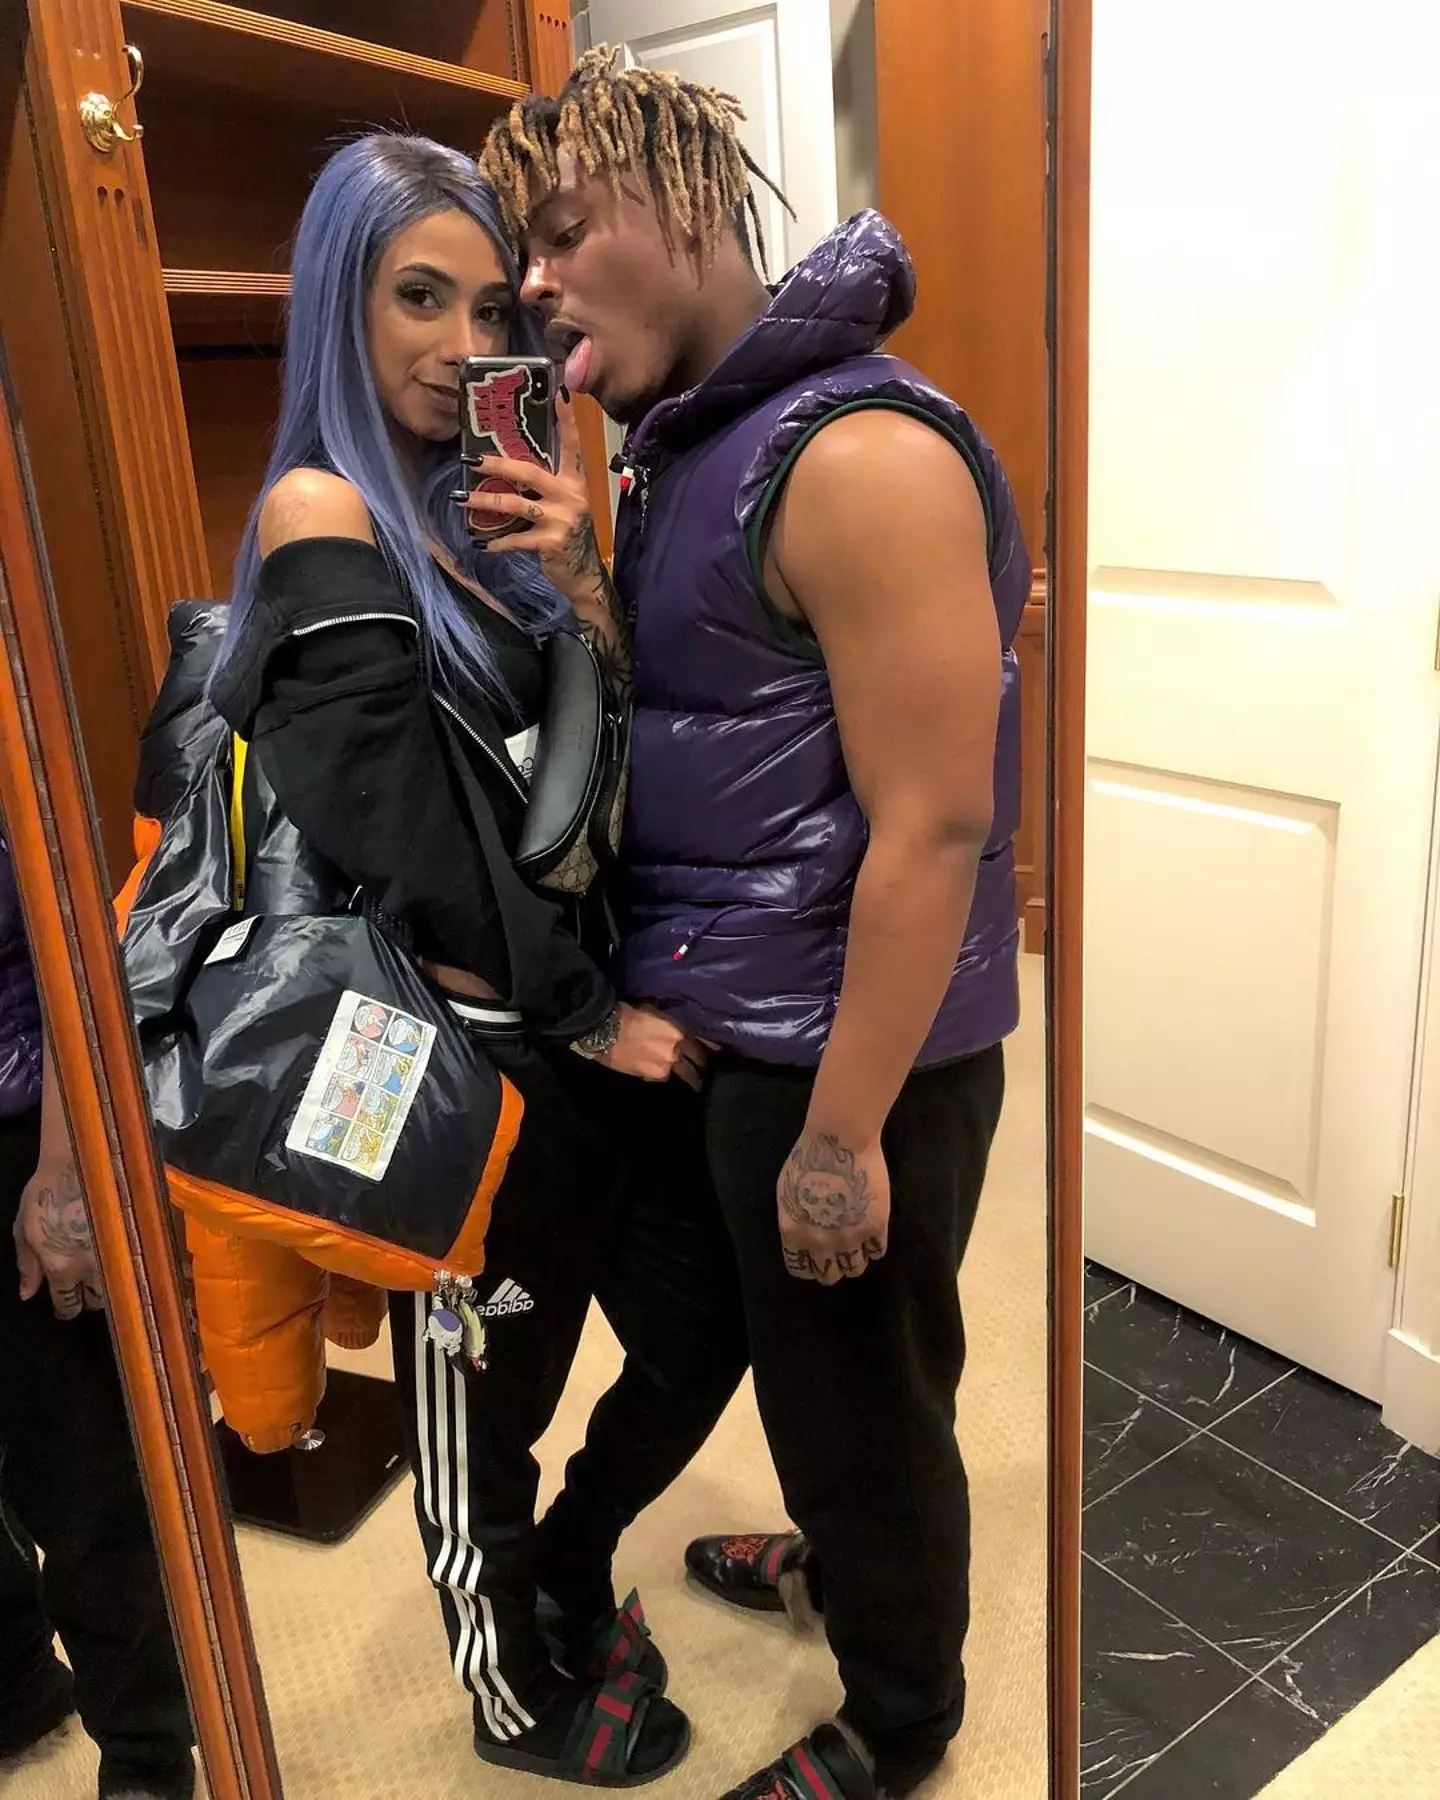 Juice WRLD's former fiancée Ally Lotti is said to be selling their sex tape.